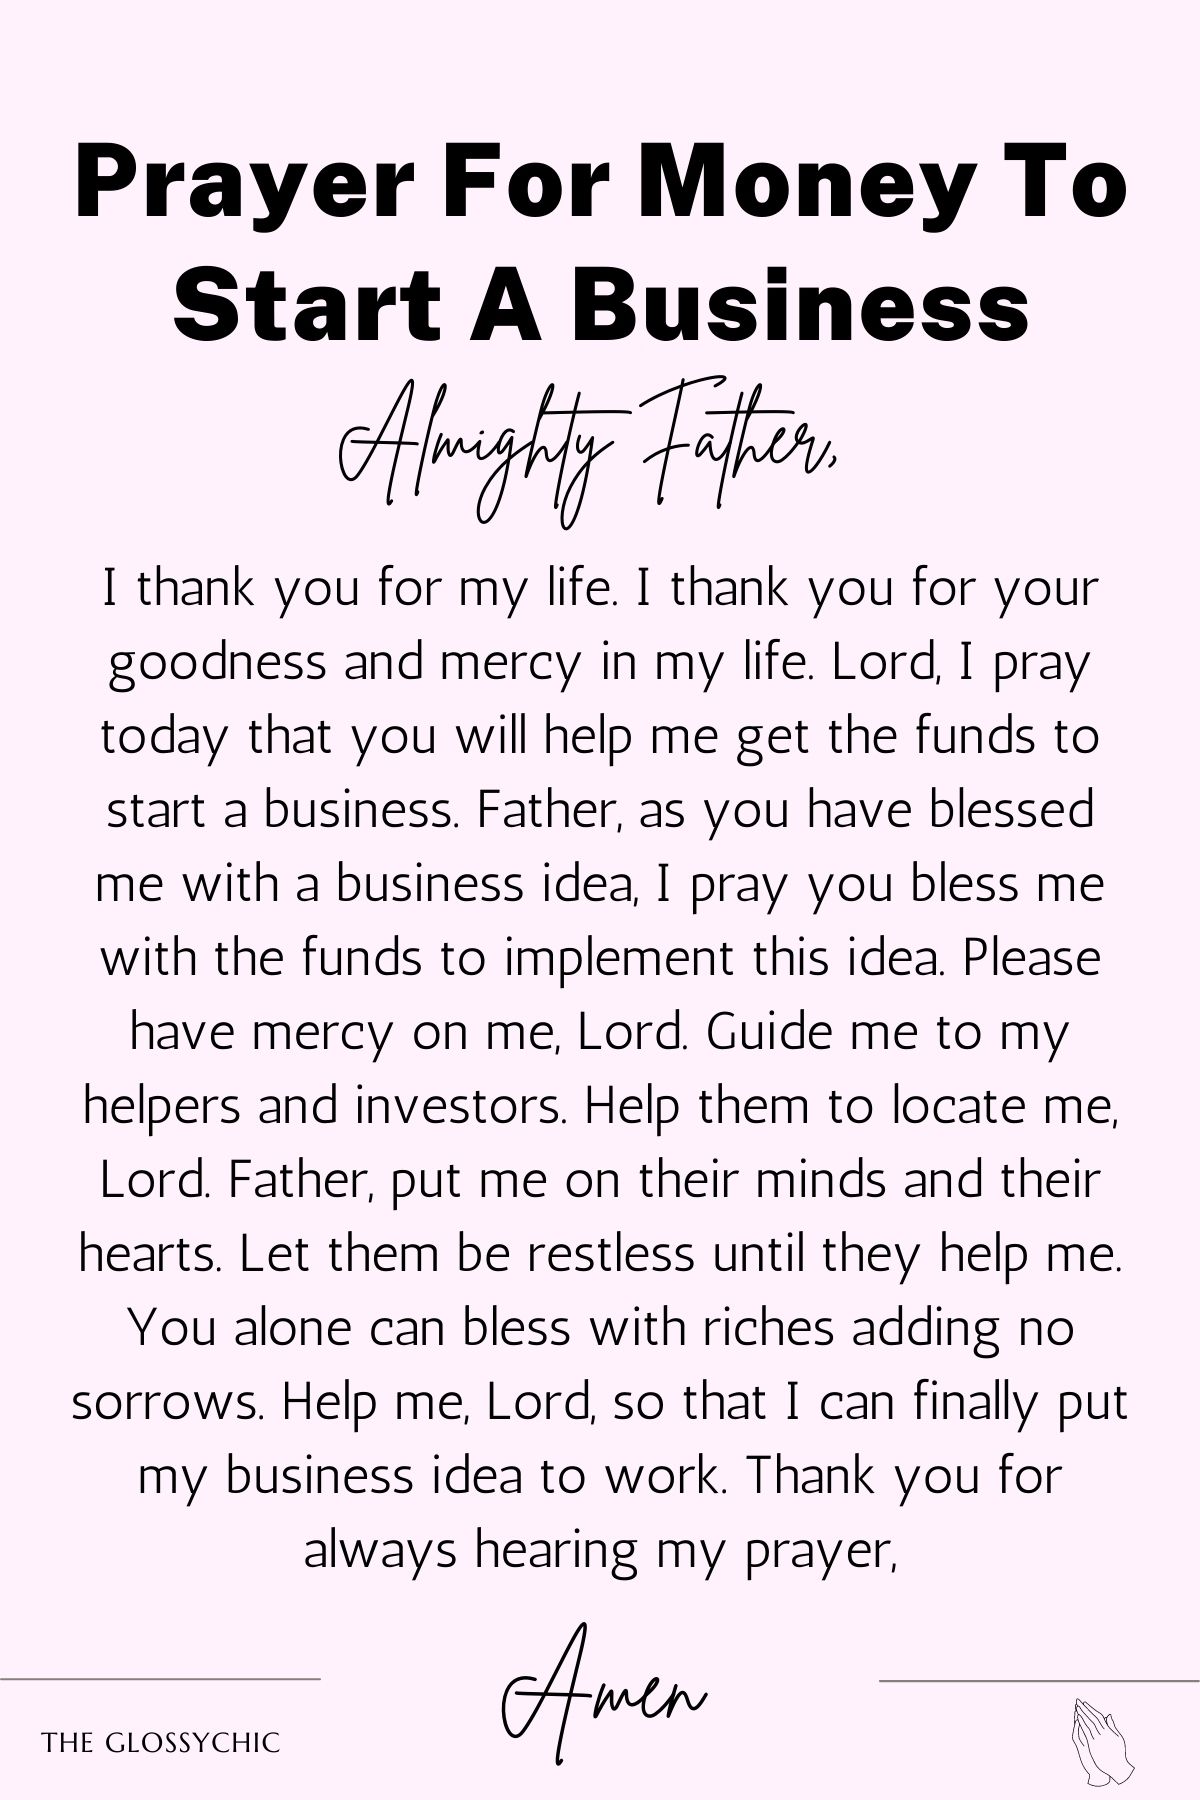 Prayer for money to start a business